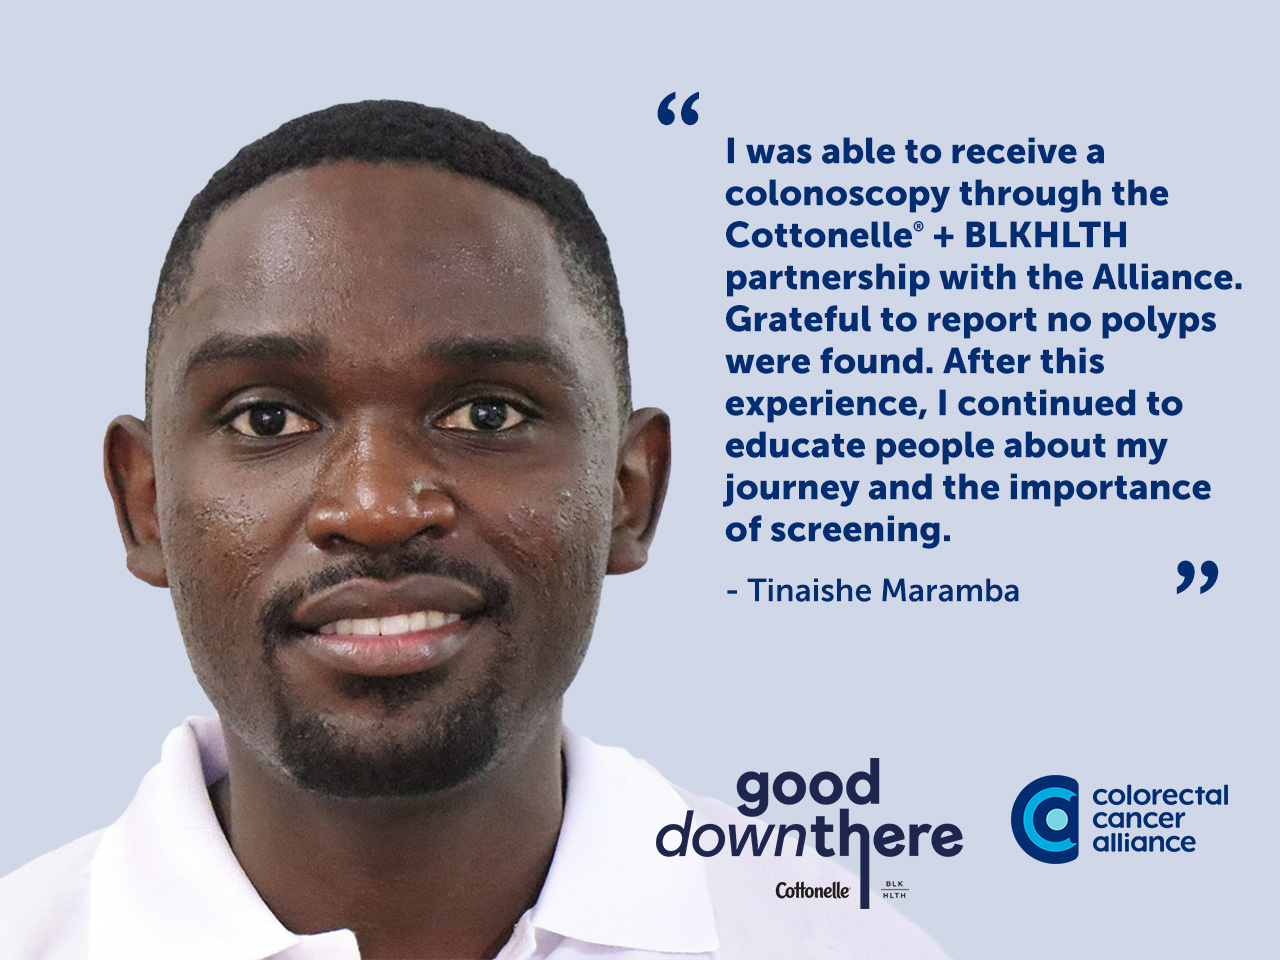 Tinaishe Maramba highlights how the funding helped him get screened for colorectal cancer